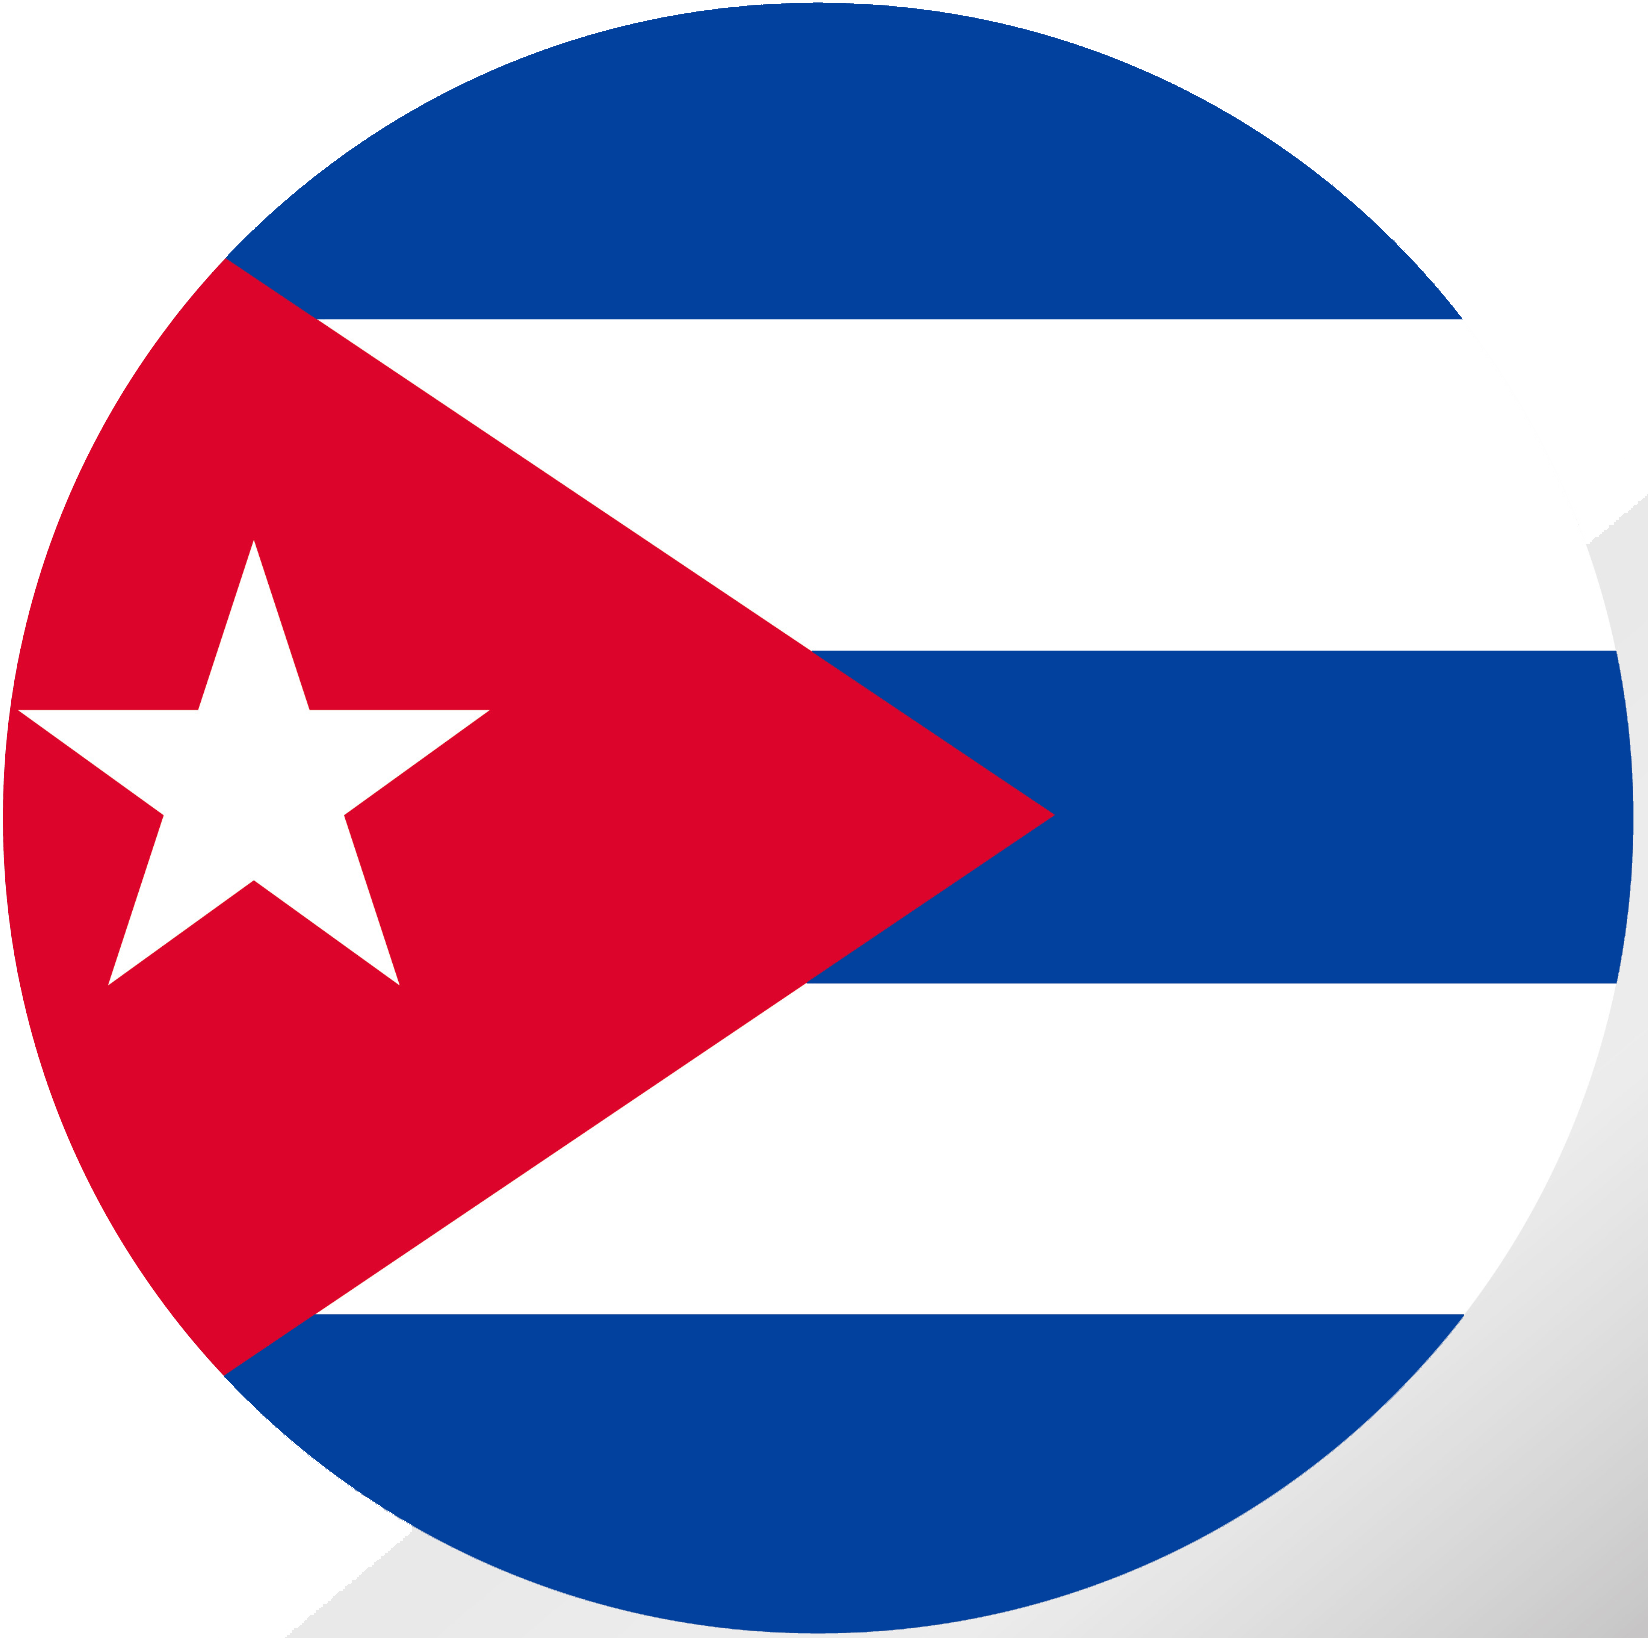 The flag of Cuba, adorned with blue, white, and red stripes, symbolizes the nation's history and revolutionary spirit.